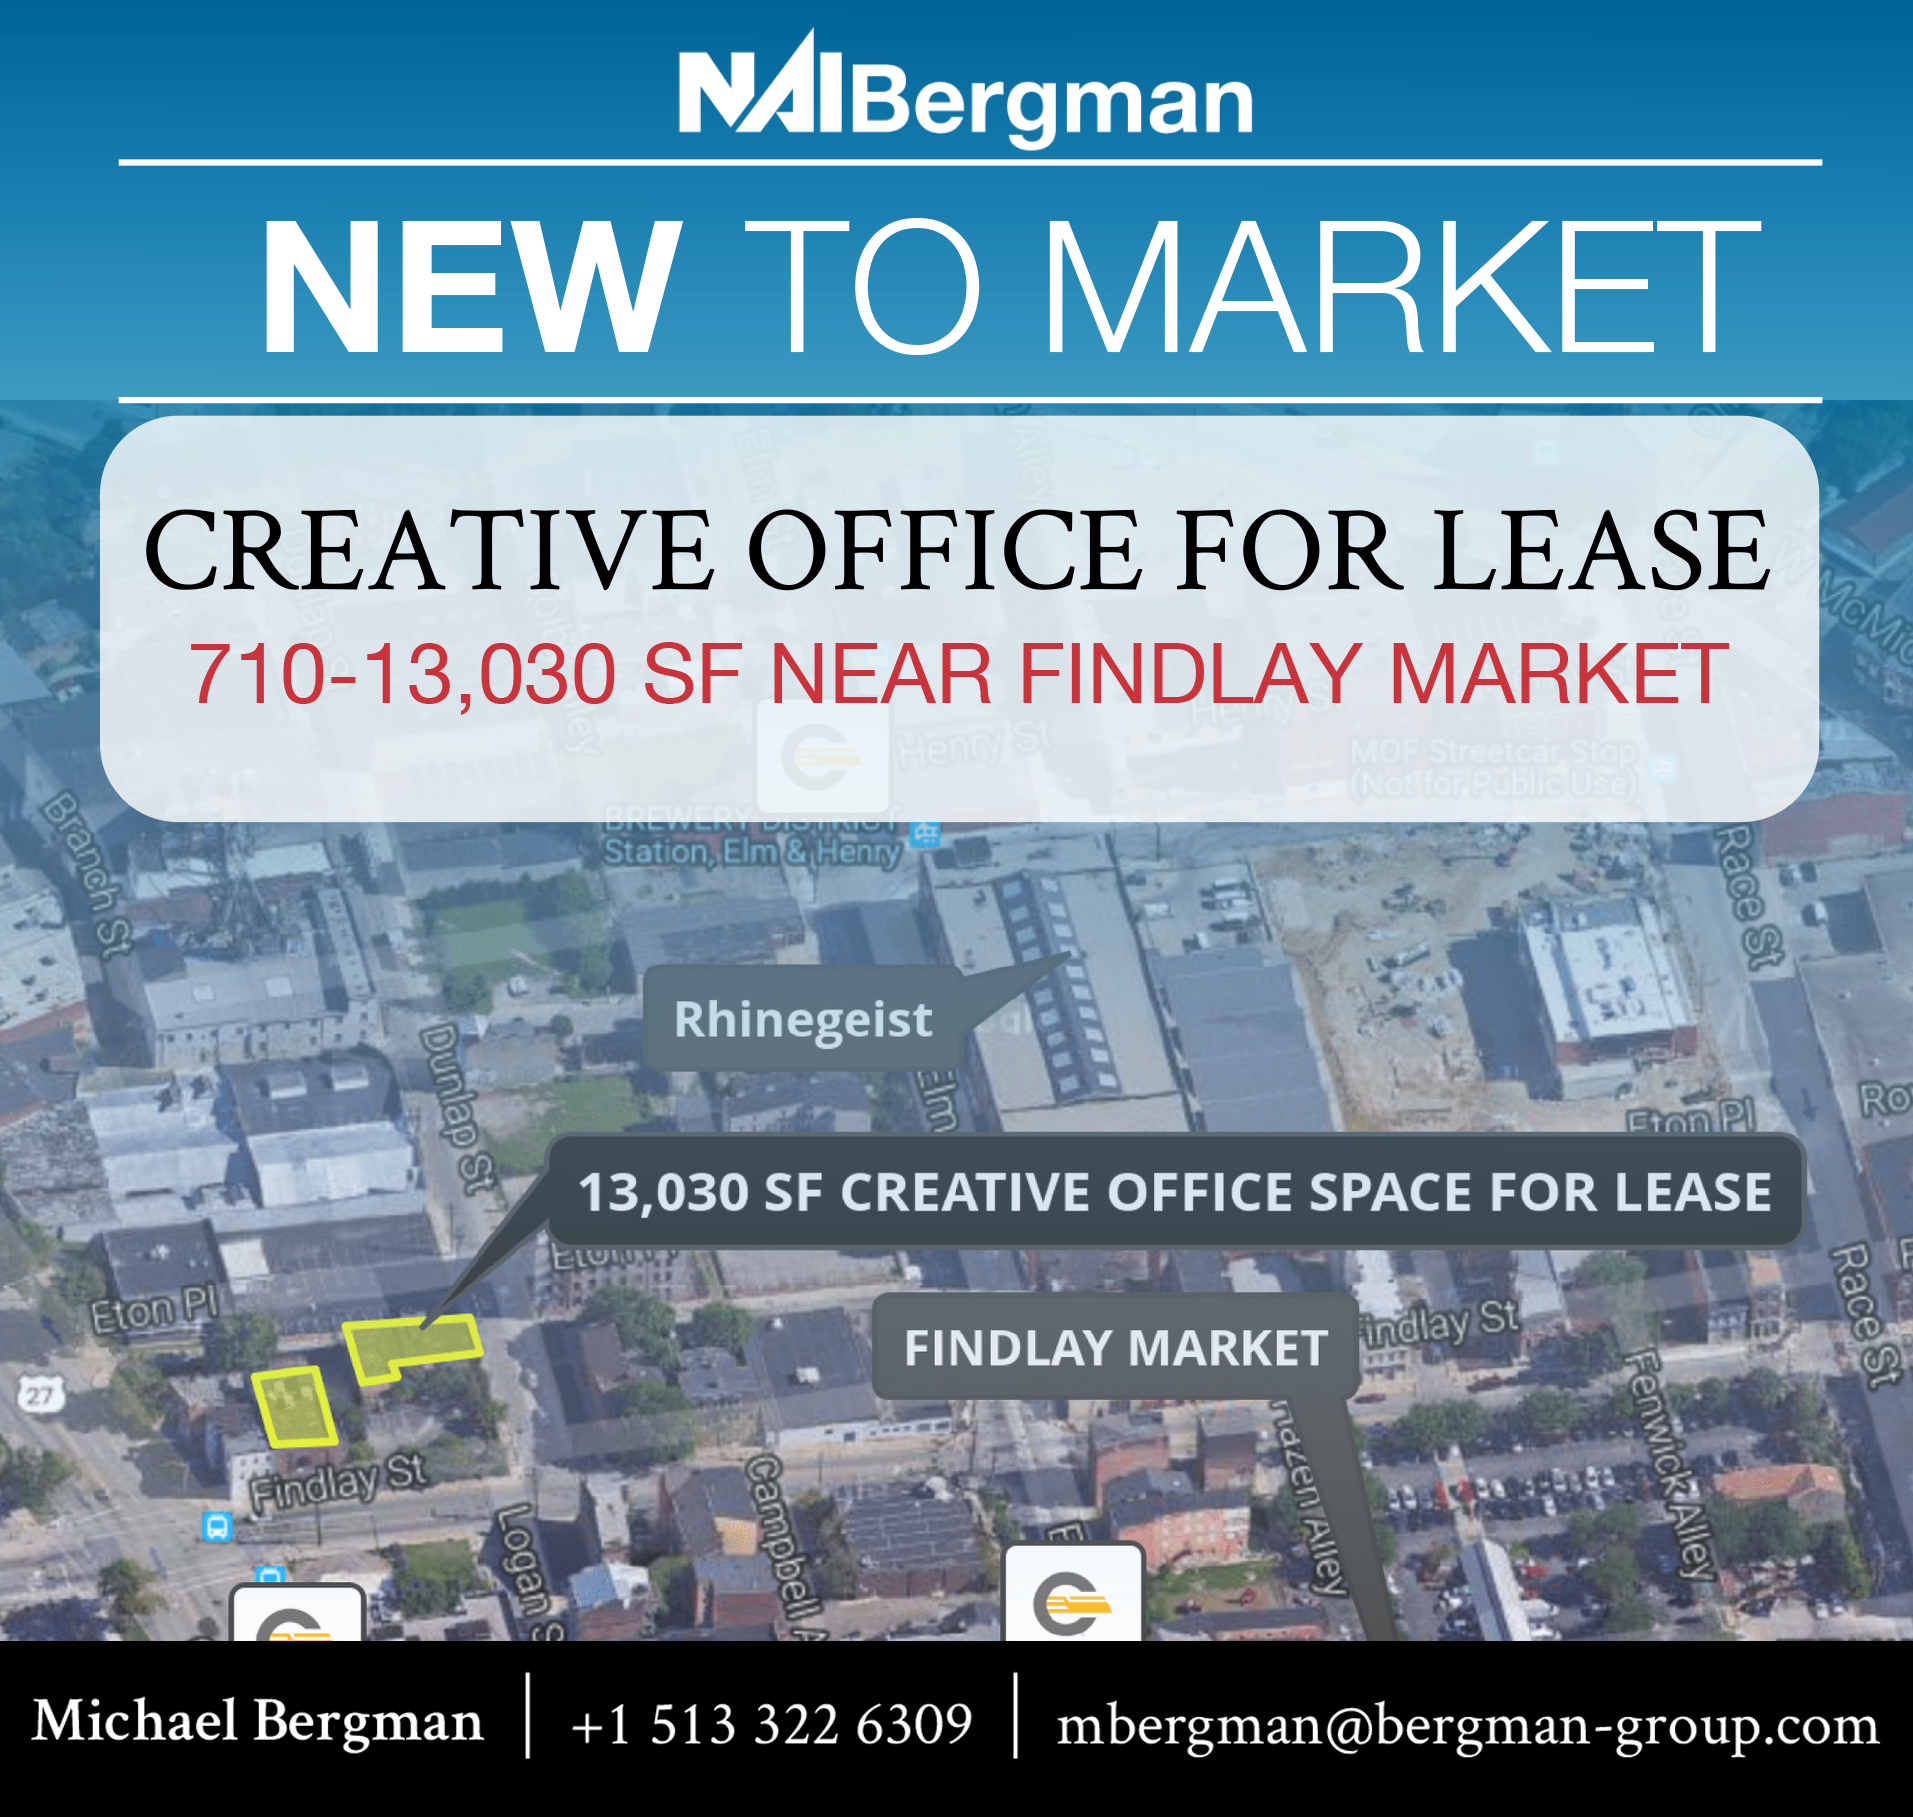 NAI Bergman, Leasing, Selling, Commercial Real Estate, CRE, Cincinnati Commercial Real Estate, Property Management, Cincinnati, Dayton, Office, Retail, Industrial, Medical, Multi Family, Land, Investment, Cincinnati News, Dayton News, Michael Bergman, Findlay Street, Findlay Market